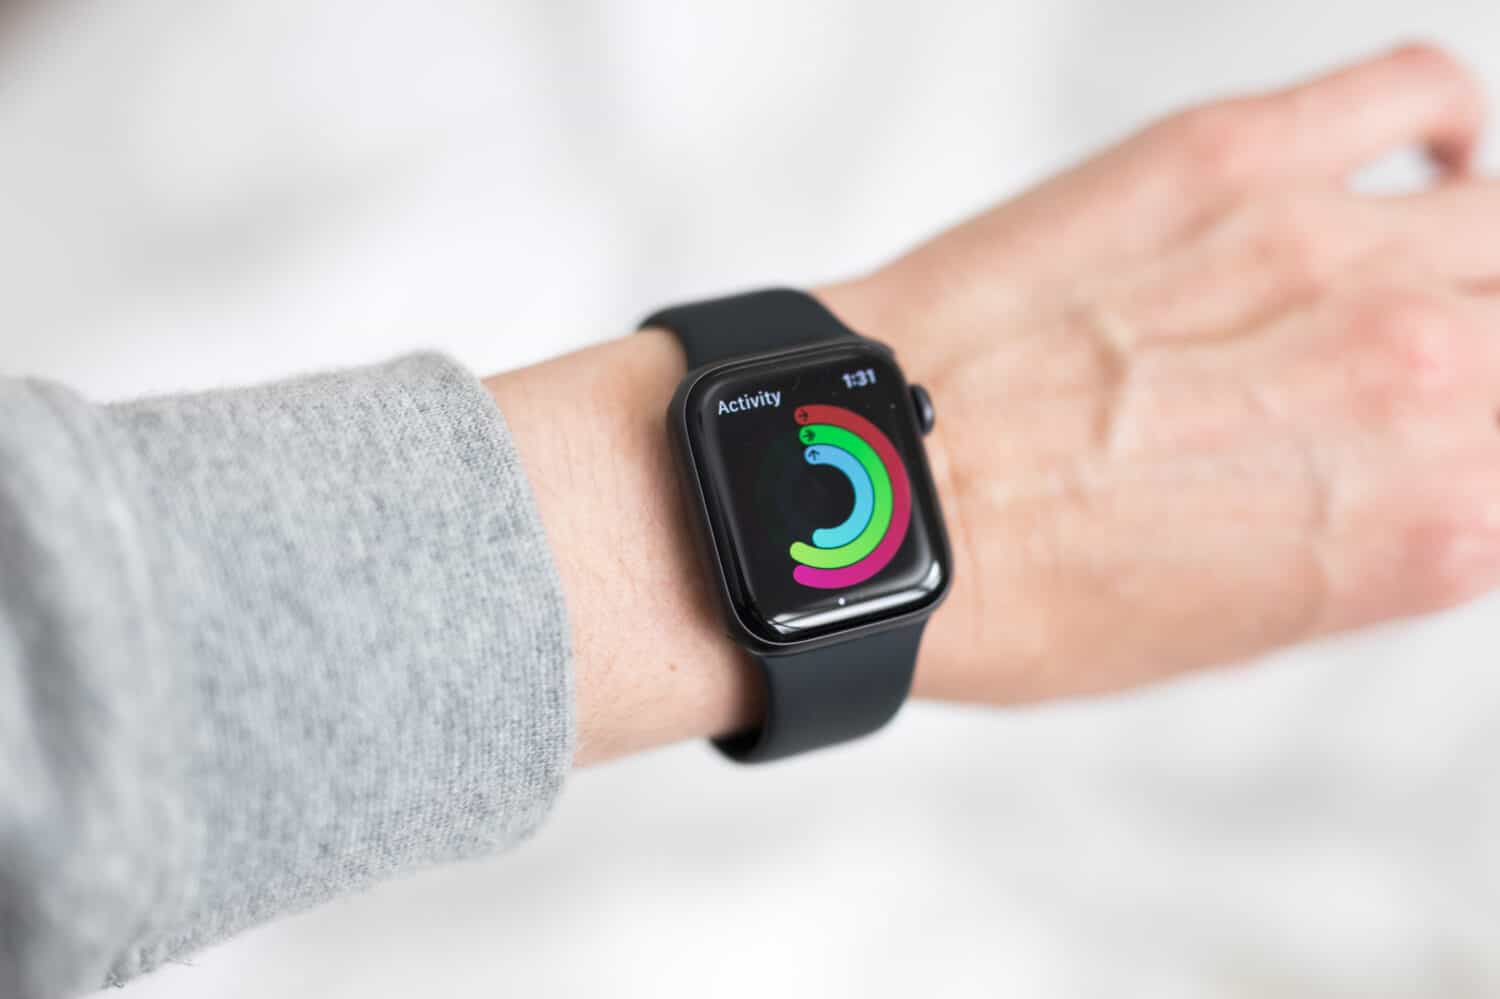 Looking down at woman's hand wrist wearing black apple watch a health fitness watch tracker to monitor heart rate, activity levels, execise fitness movement. Keeps you fit and motivated. Modern